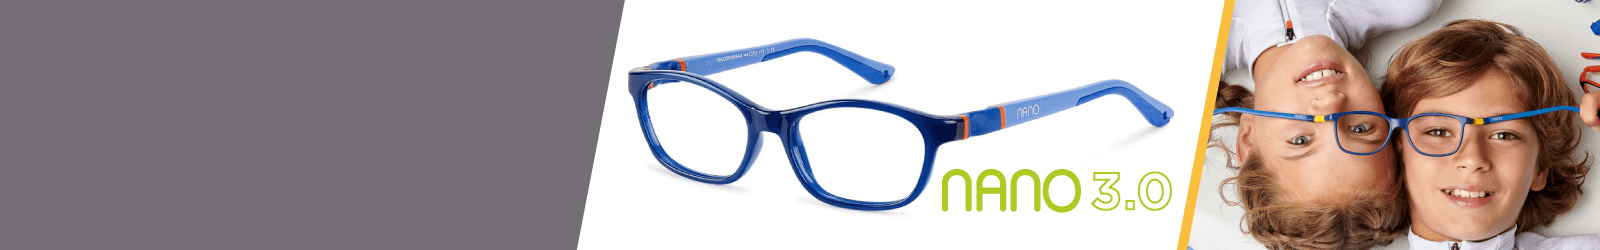 Nano 3.0 Indestructible Kids Glasses from 6 to 8-year-old for Girls